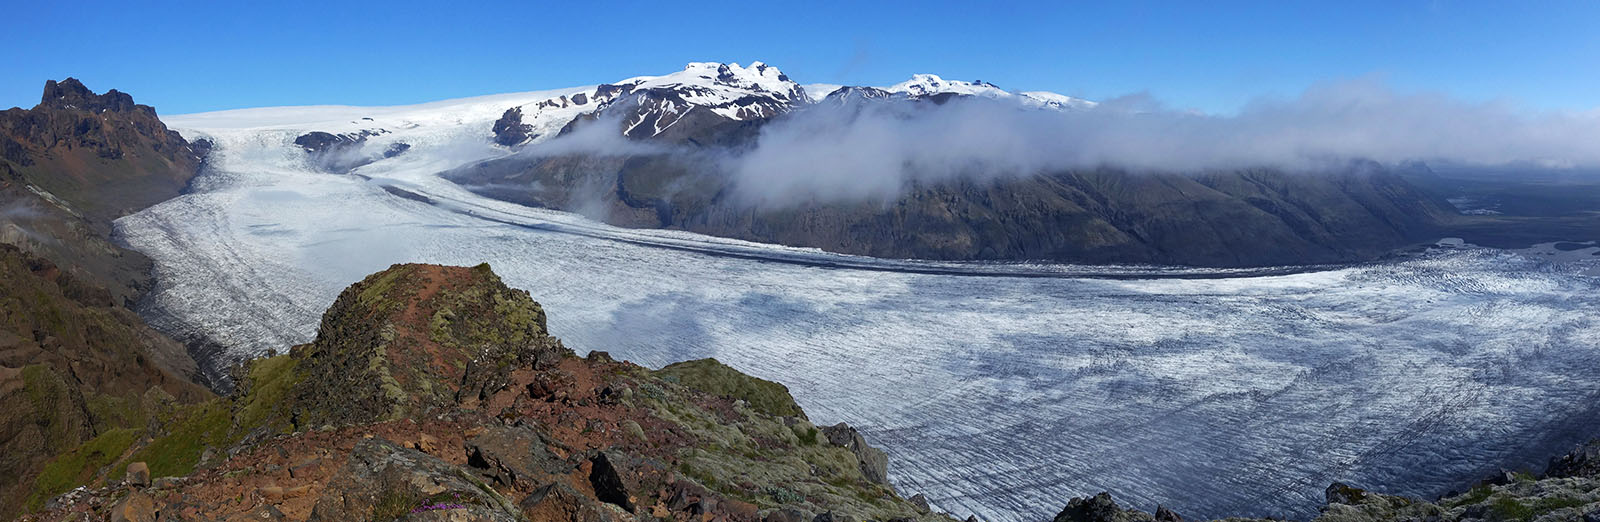 Iceland's glaciers - here Skaftafelljökull - have also rapidly lost mass over the past 20 years. (Photograph: P. Rüegg / ETH Zurich)